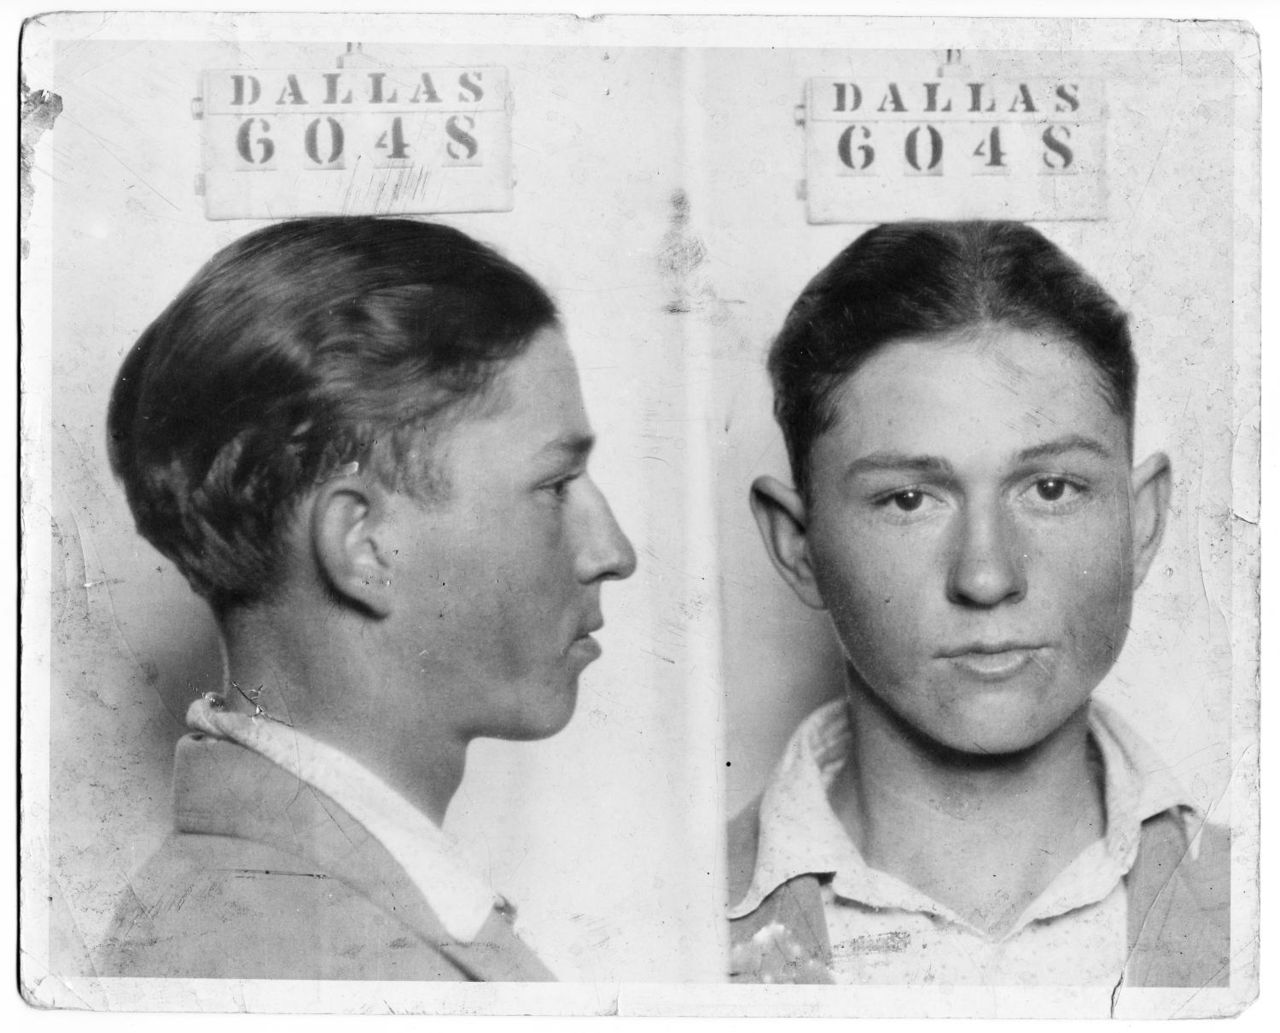 Clyde Barrow (of the famous bandit duo Bonnie & Clyde)